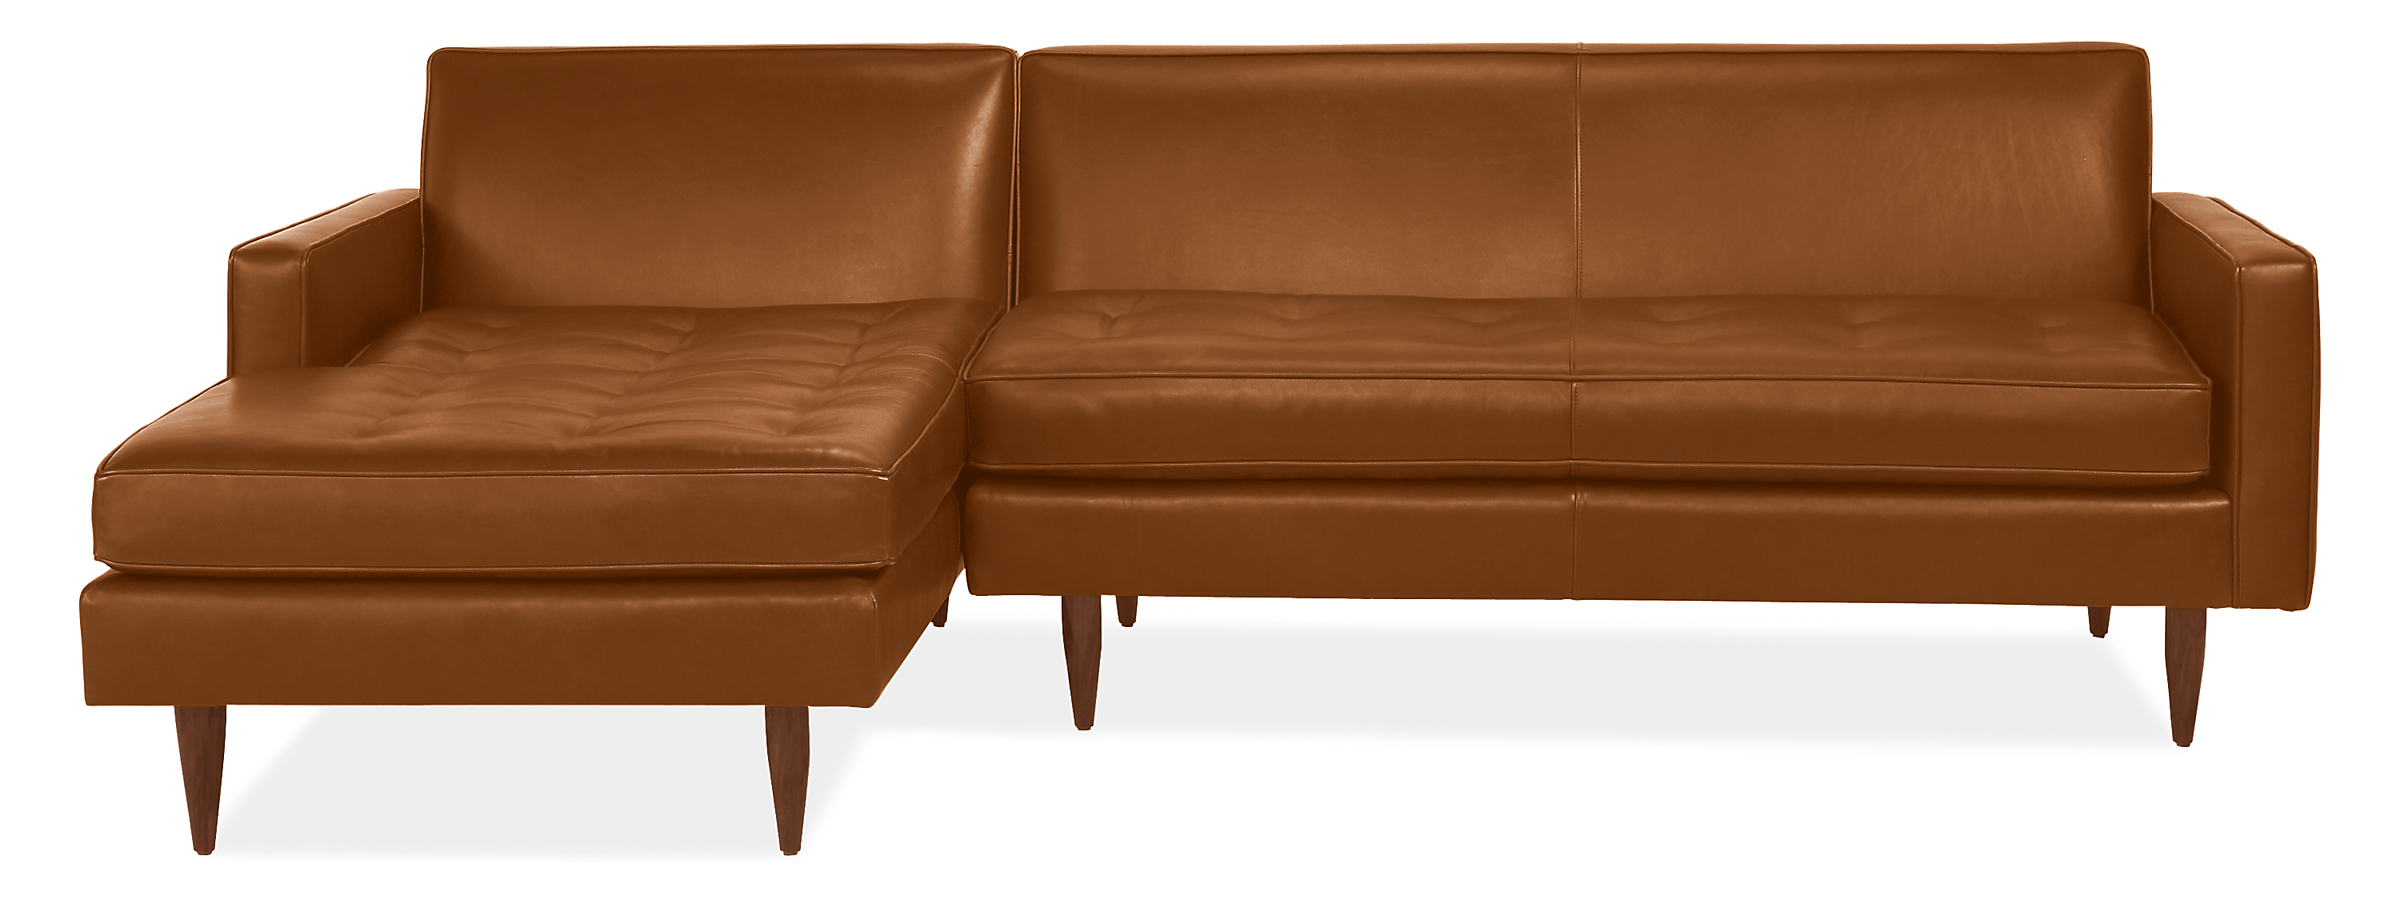 Reese Leather Sofas with Chaise